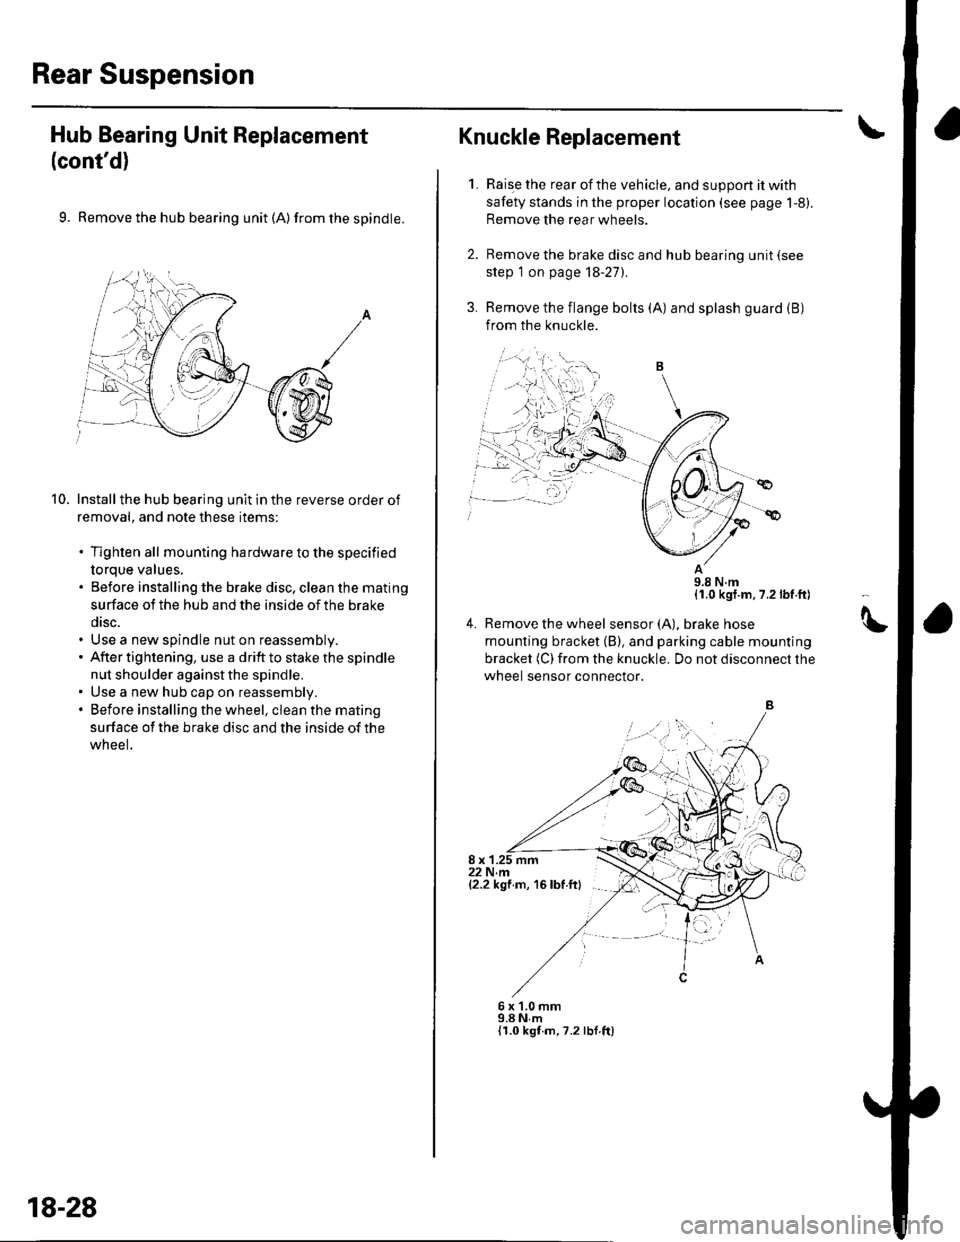 HONDA CIVIC 2003 7.G Workshop Manual Rear Suspension
Hub Bearing Unit Replacement
(contd)
9. Remove the hub bearing unit (A) from the spindle.
Install the hub bearing unit in the reverse order of
removal, and note these items:
. Tighten